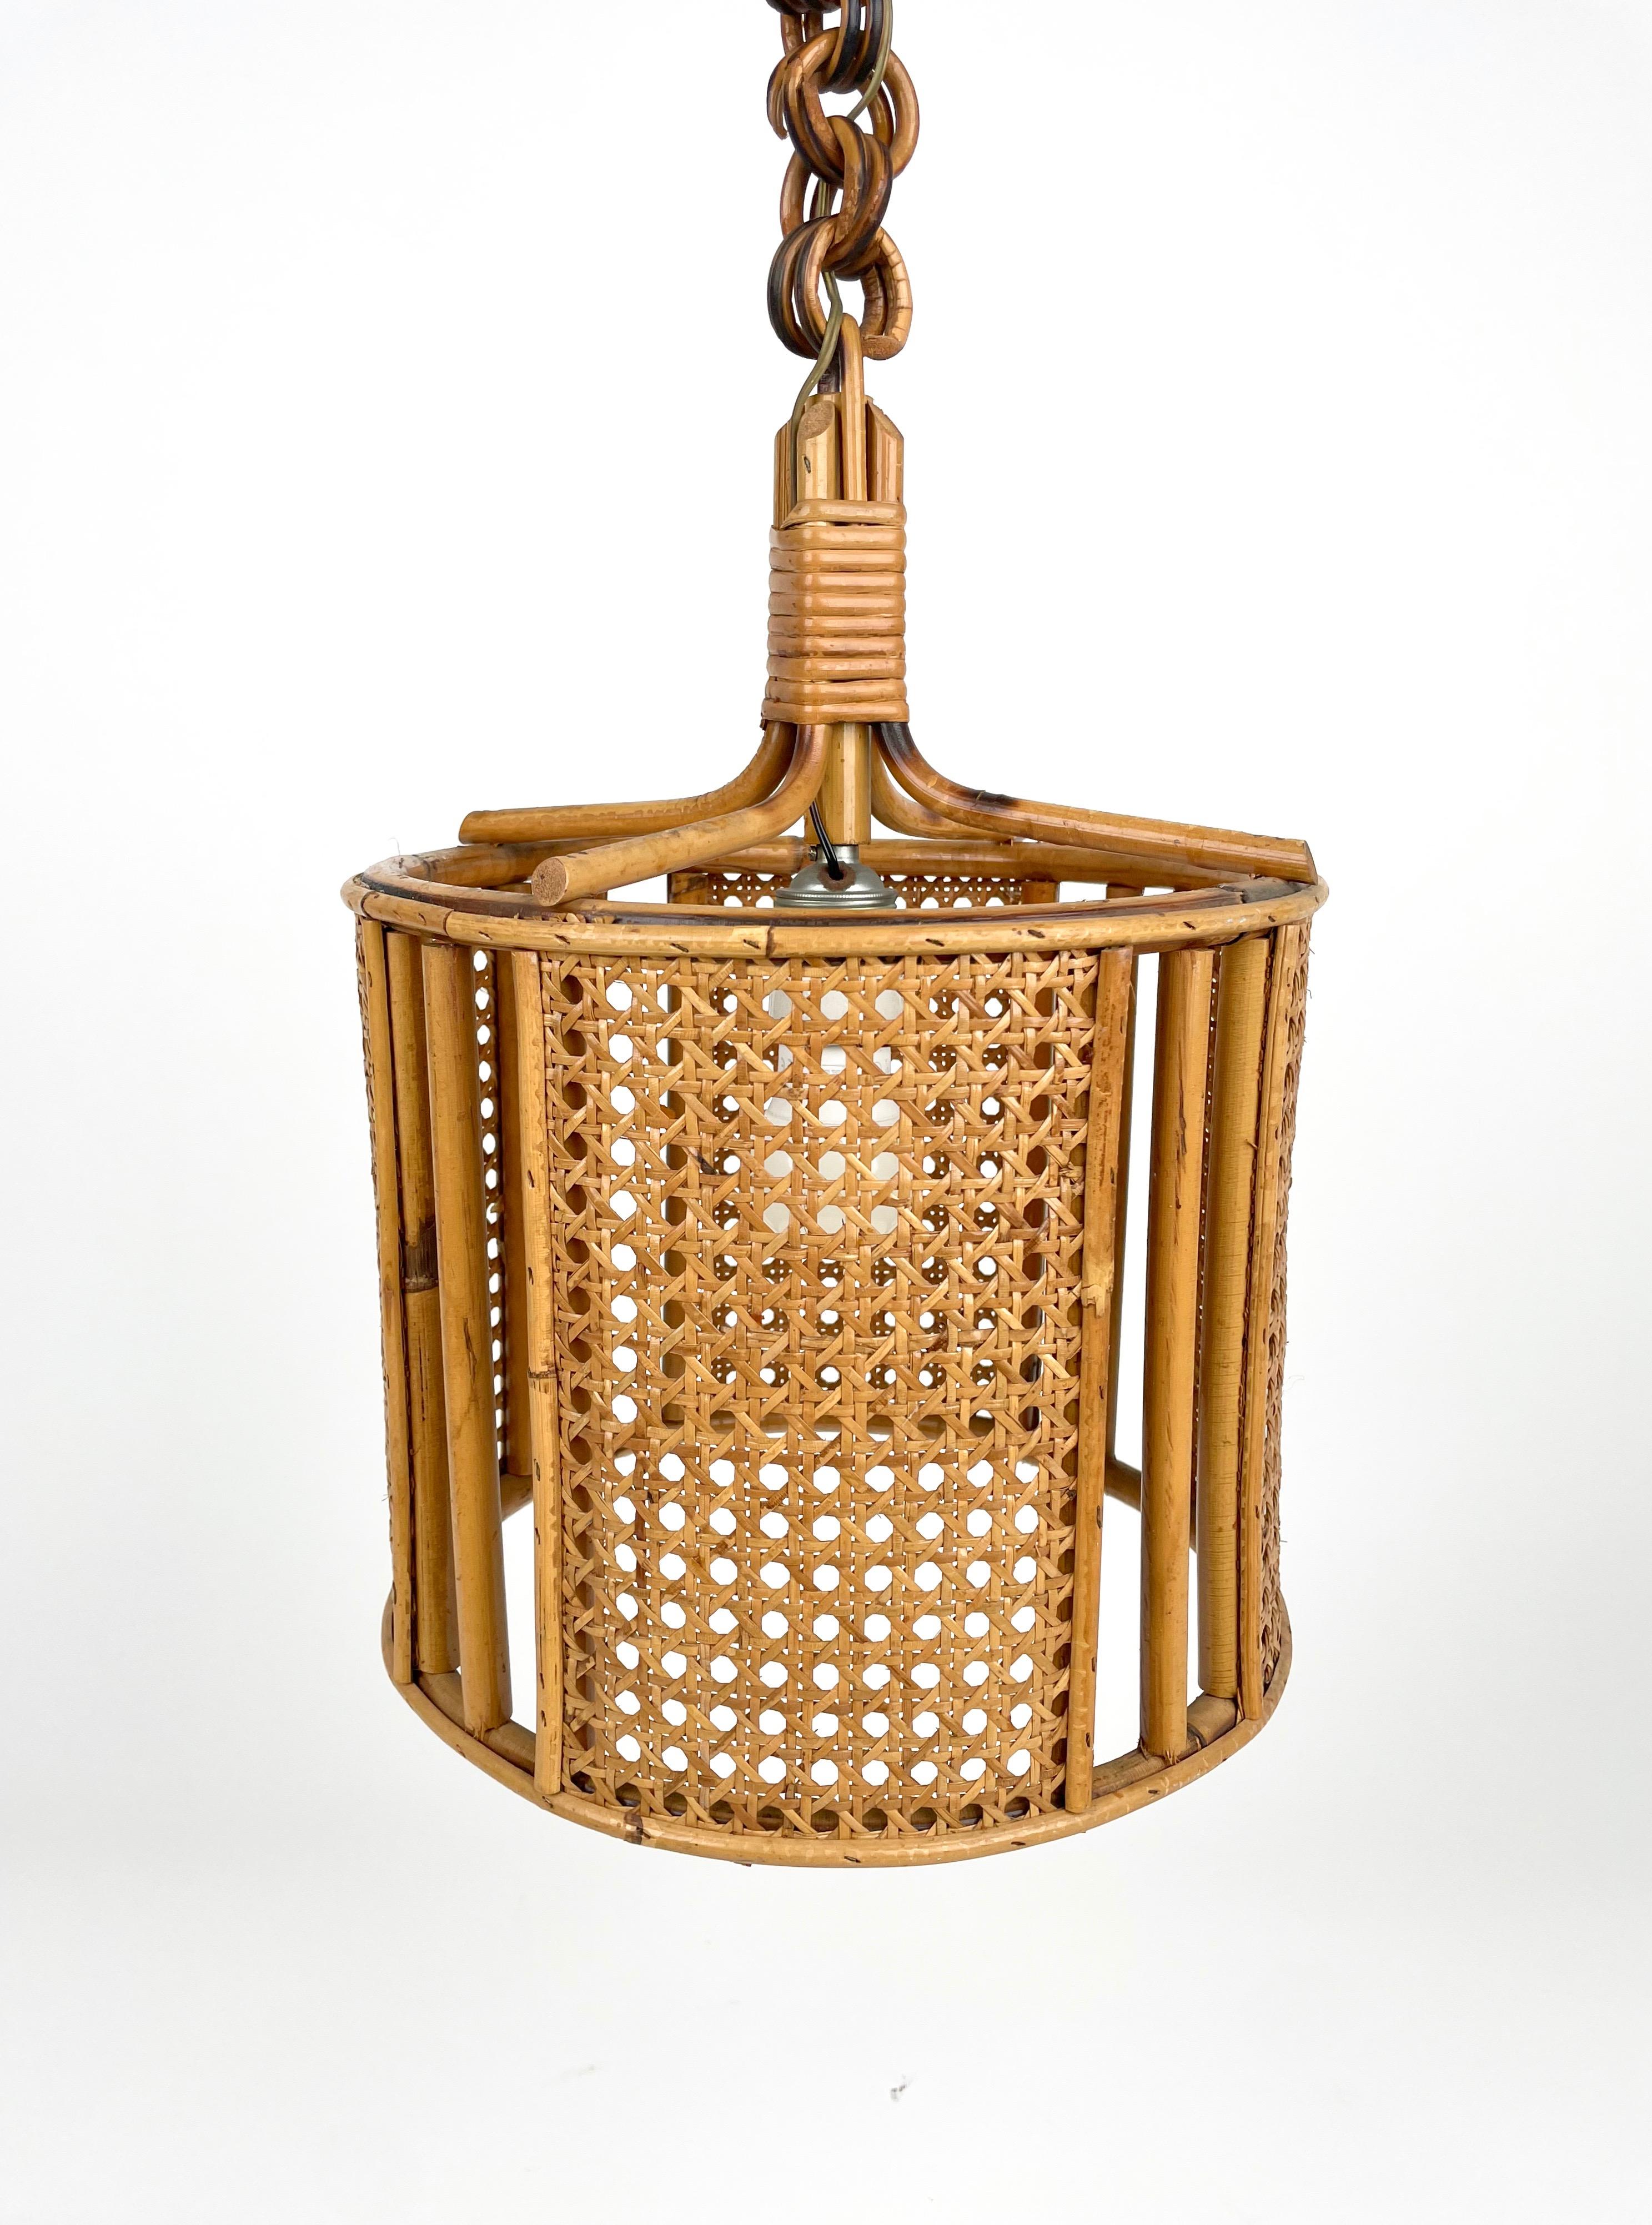 Midcentury French Riviera Rattan and Wicker Pendent, Italy 1960s For Sale 4